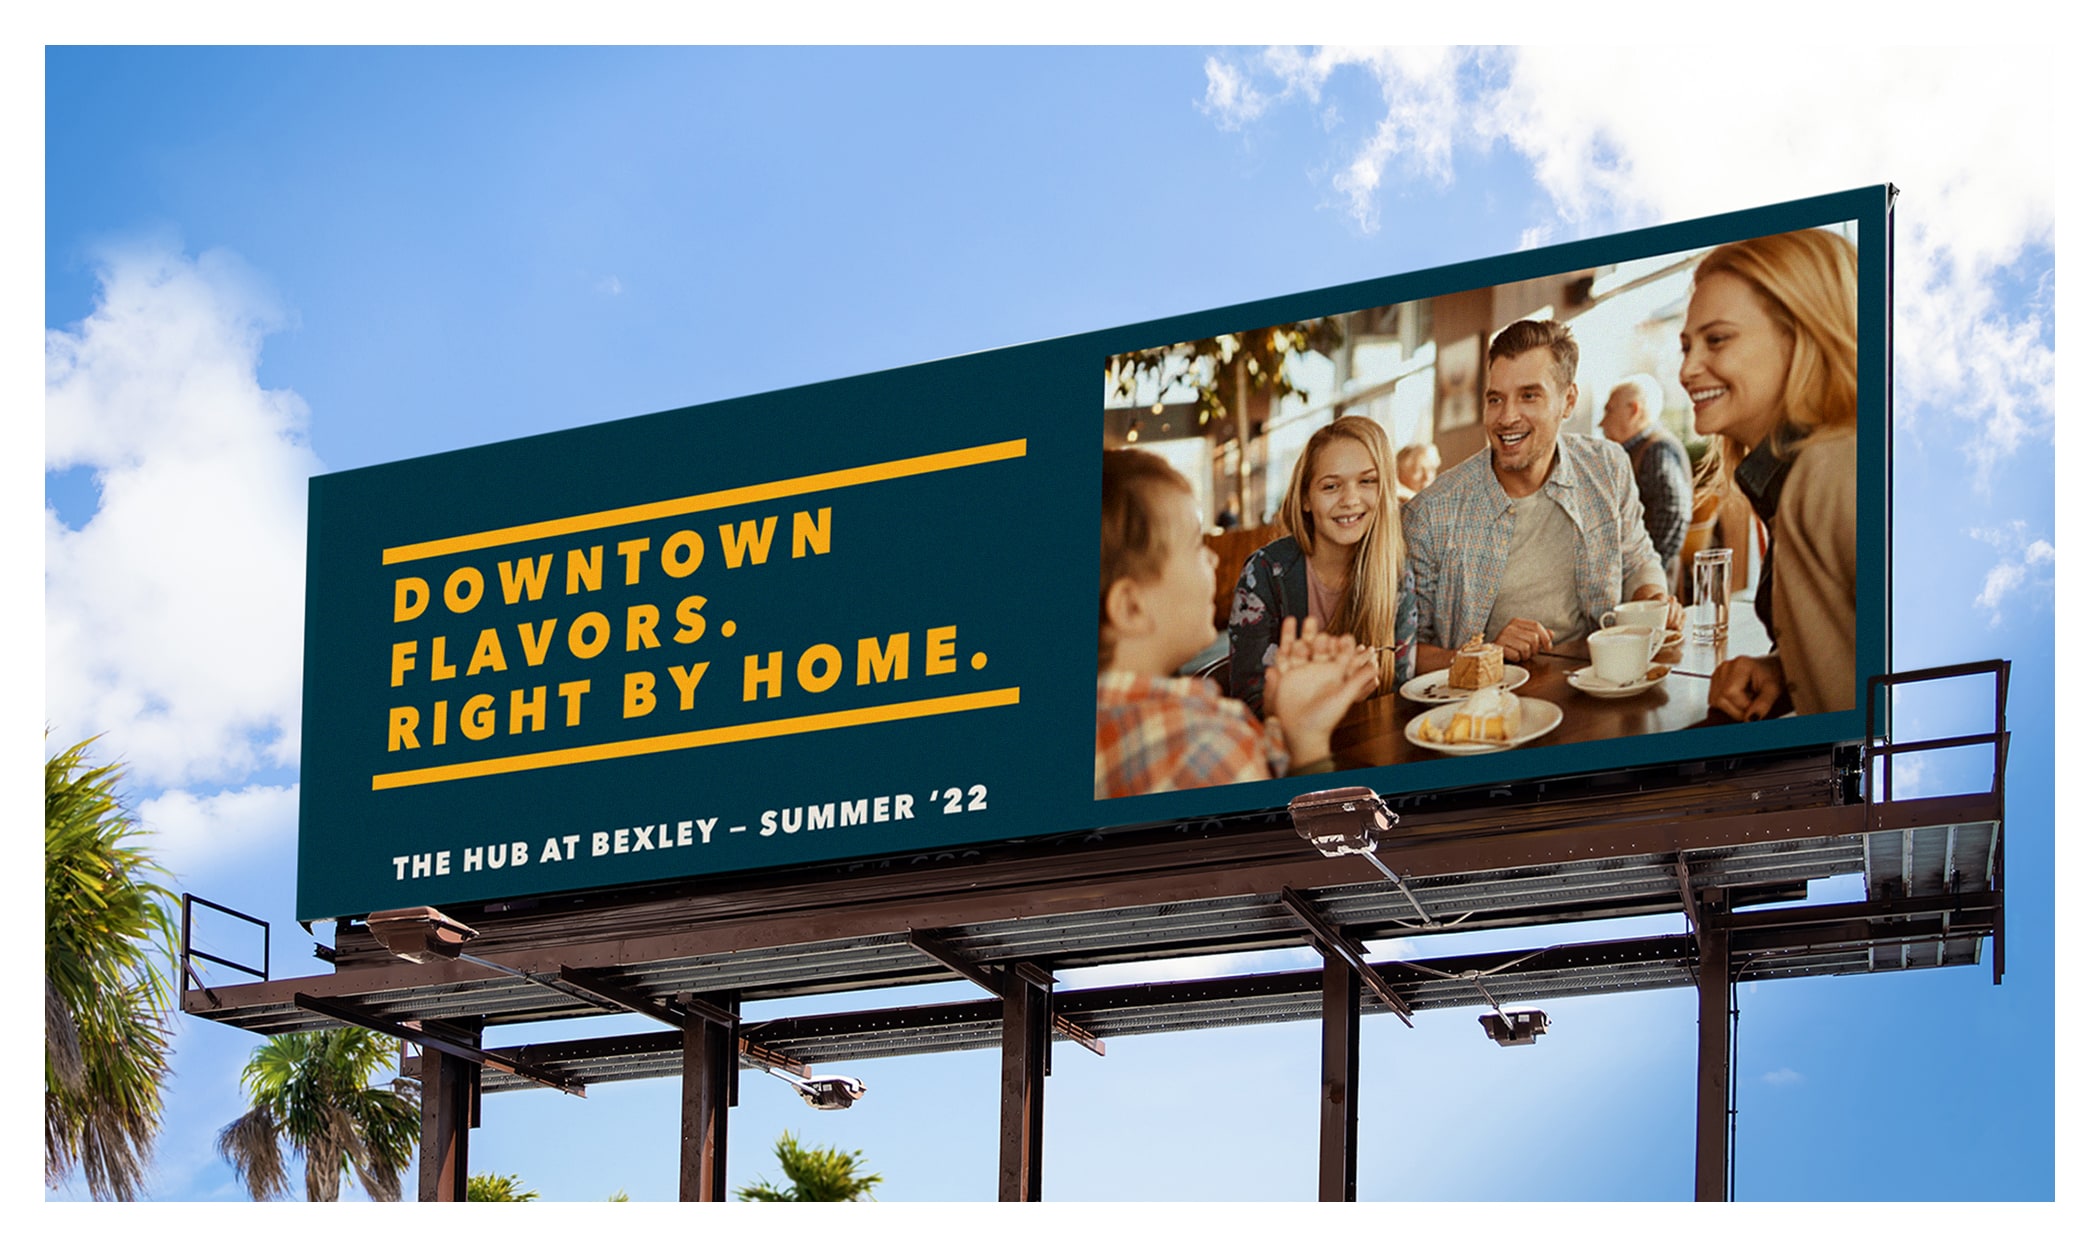 The Hub Billboard - Downtown Flavors. Right By Home.